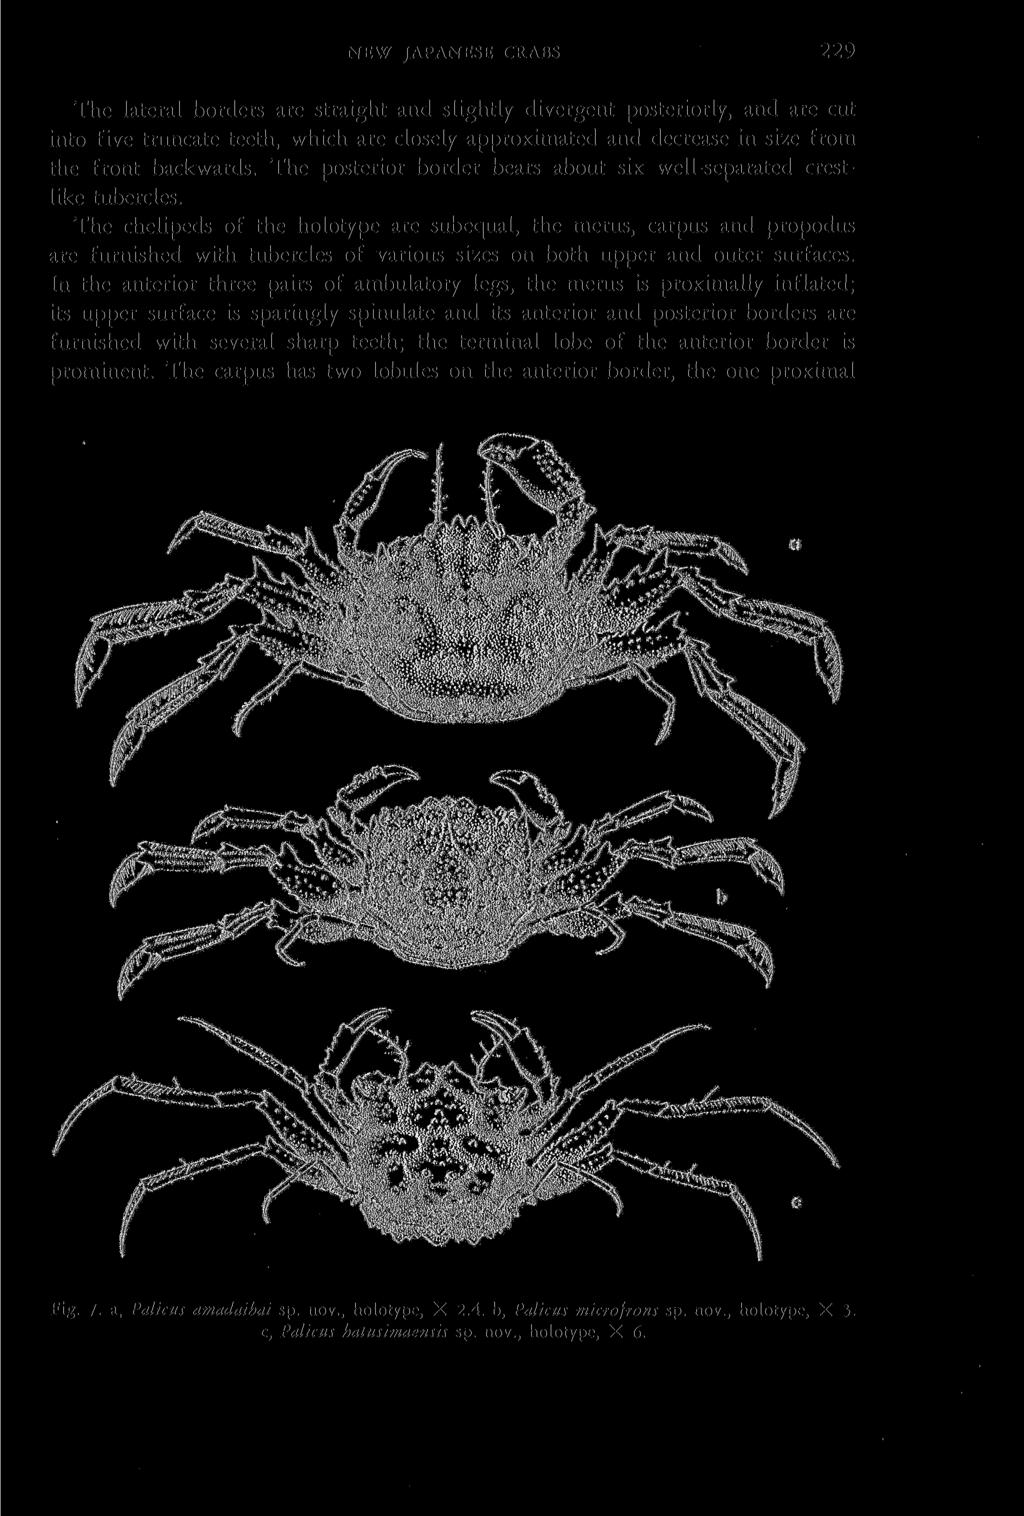 NEW JAPANESE CRABS 229 The lateral borders are straight and slightly divergent posteriorly, and are cut into five truncate teeth, which are closely approximated and decrease in size from the front